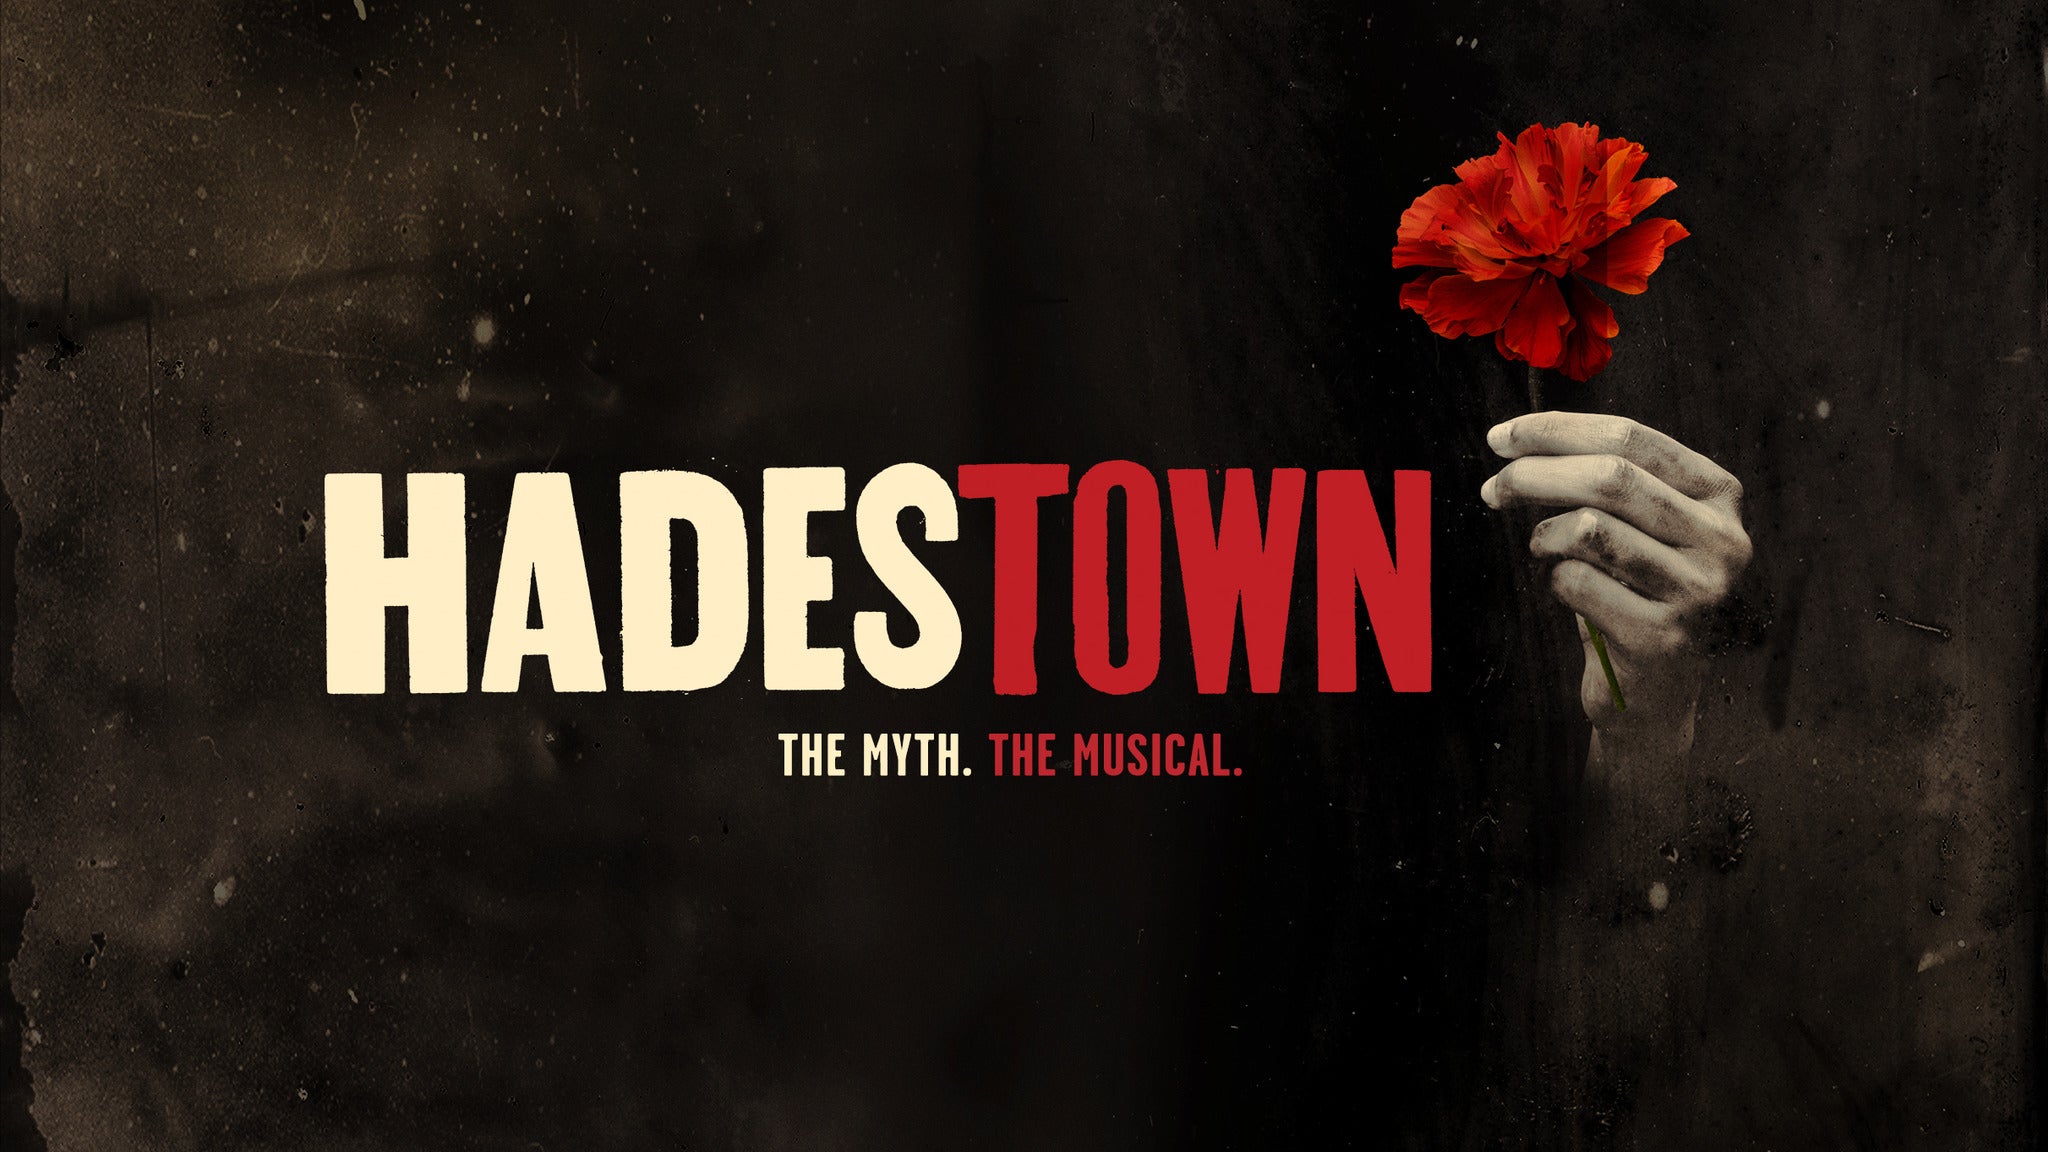 Hadestown at First Interstate Center for the Arts